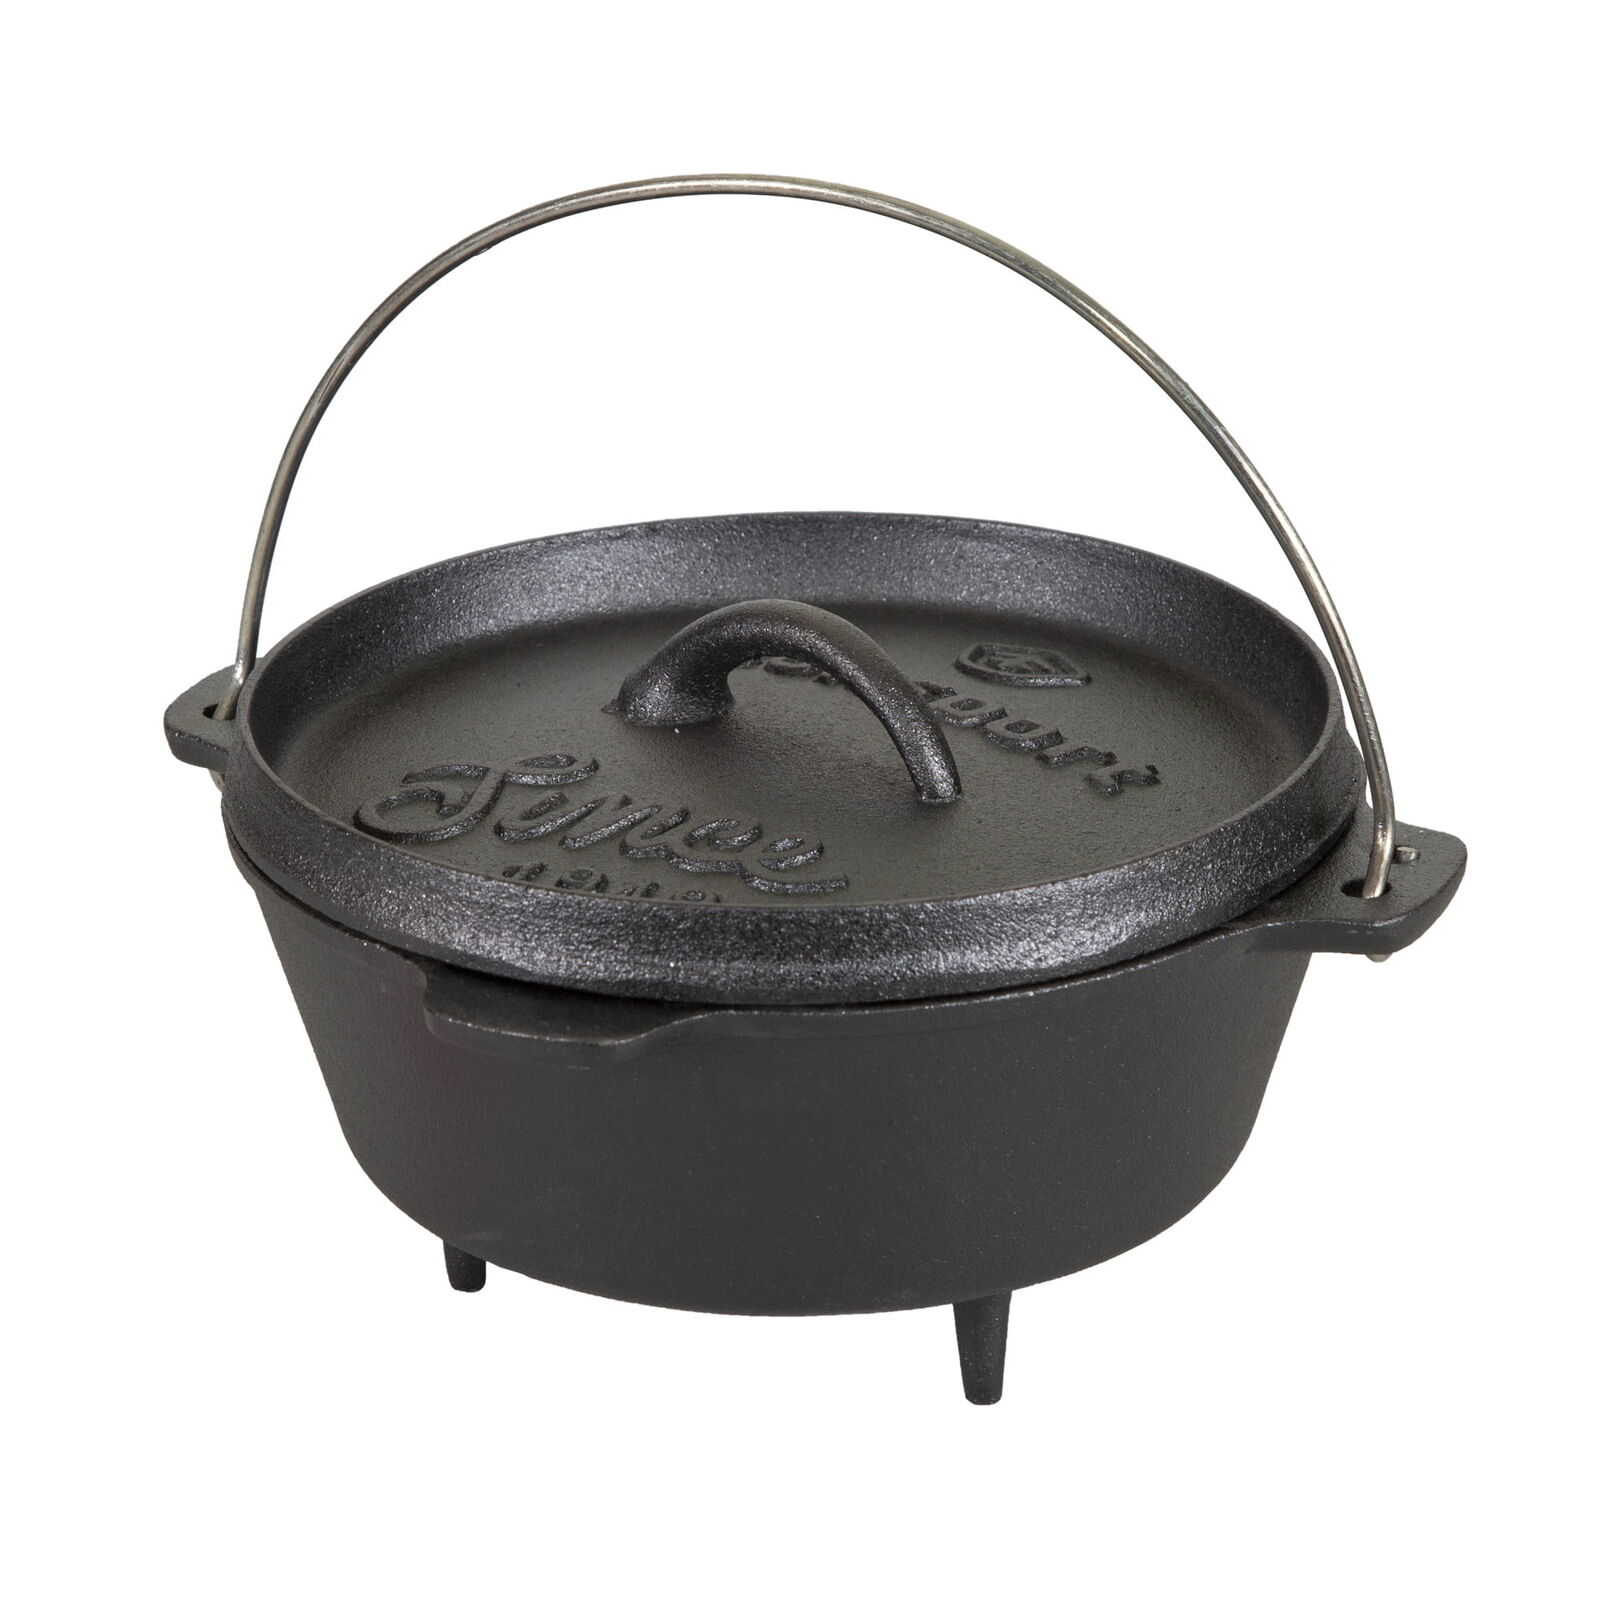 Stansport 2 QT Pre-Seasoned Cast Iron Dutch Oven with Legs US